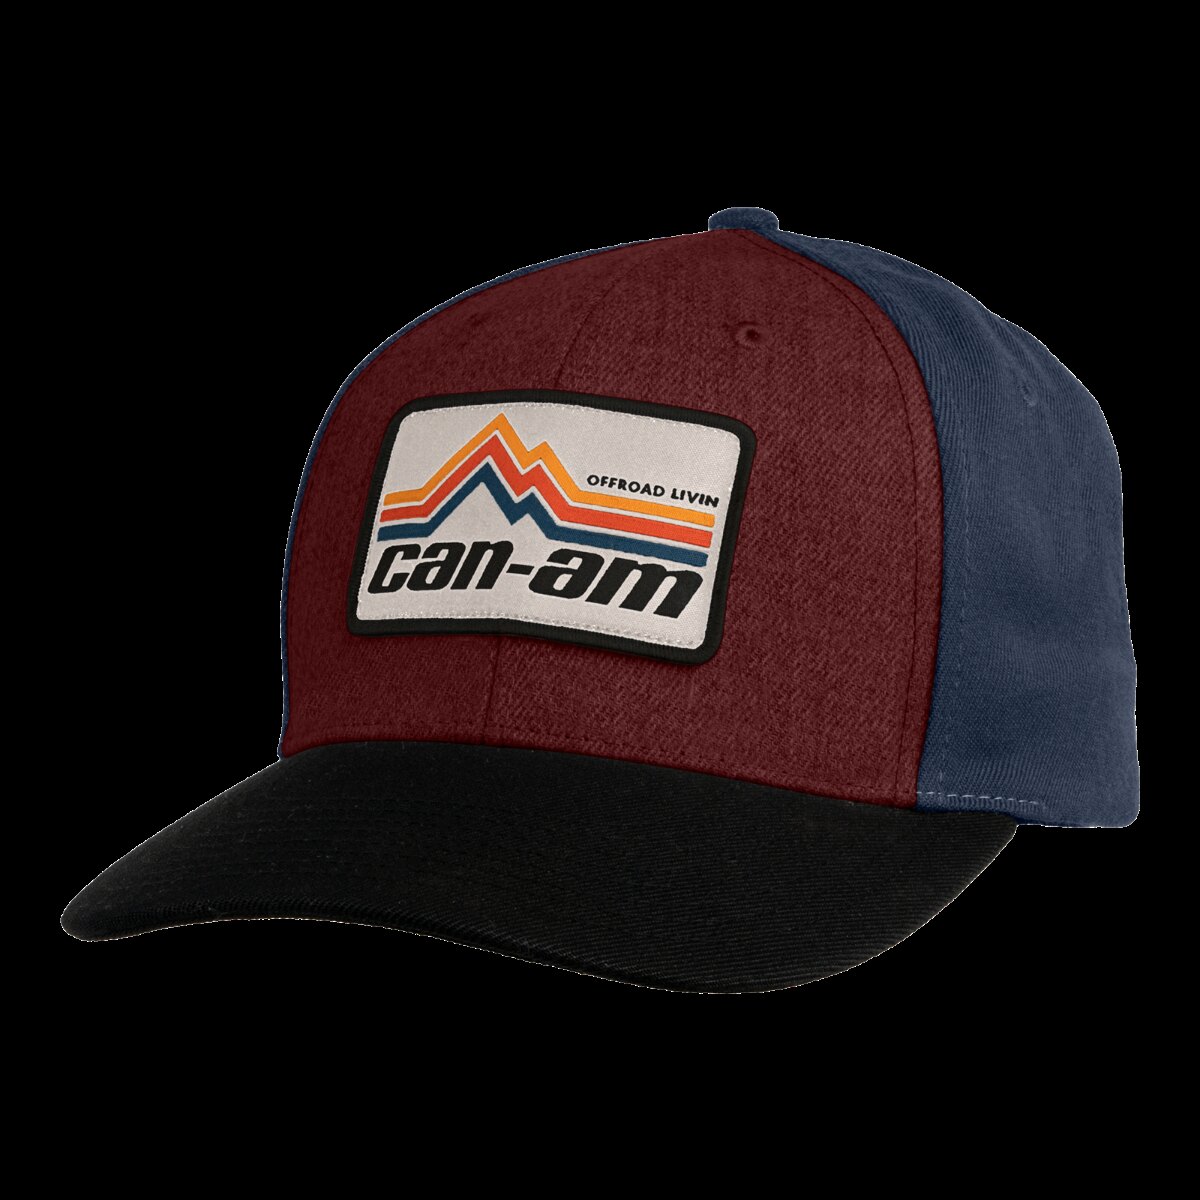 Men's Can Am Curved Cap Onesize Burgundy